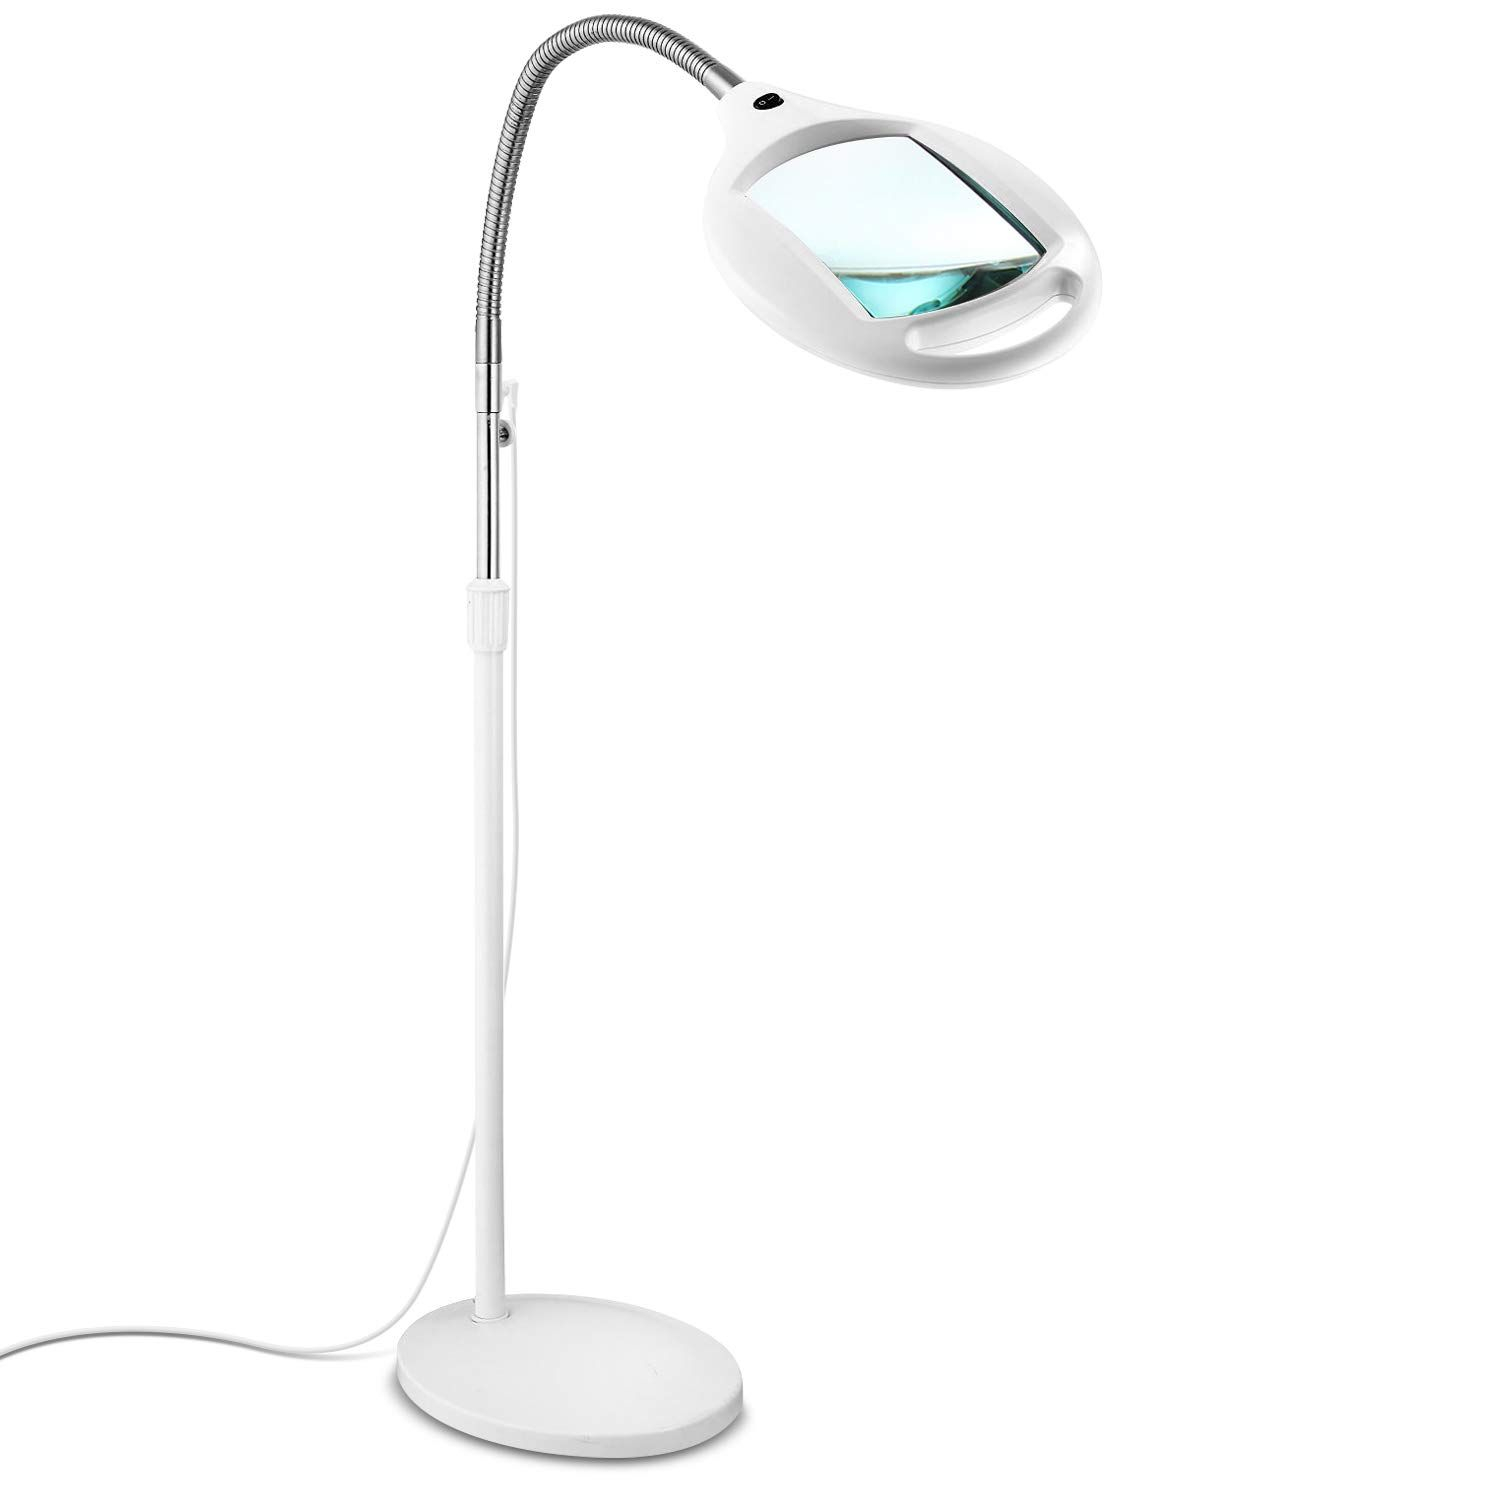 Brightech Lightview Pro Led Magnifying Floor Lamp Daylight throughout dimensions 1500 X 1500